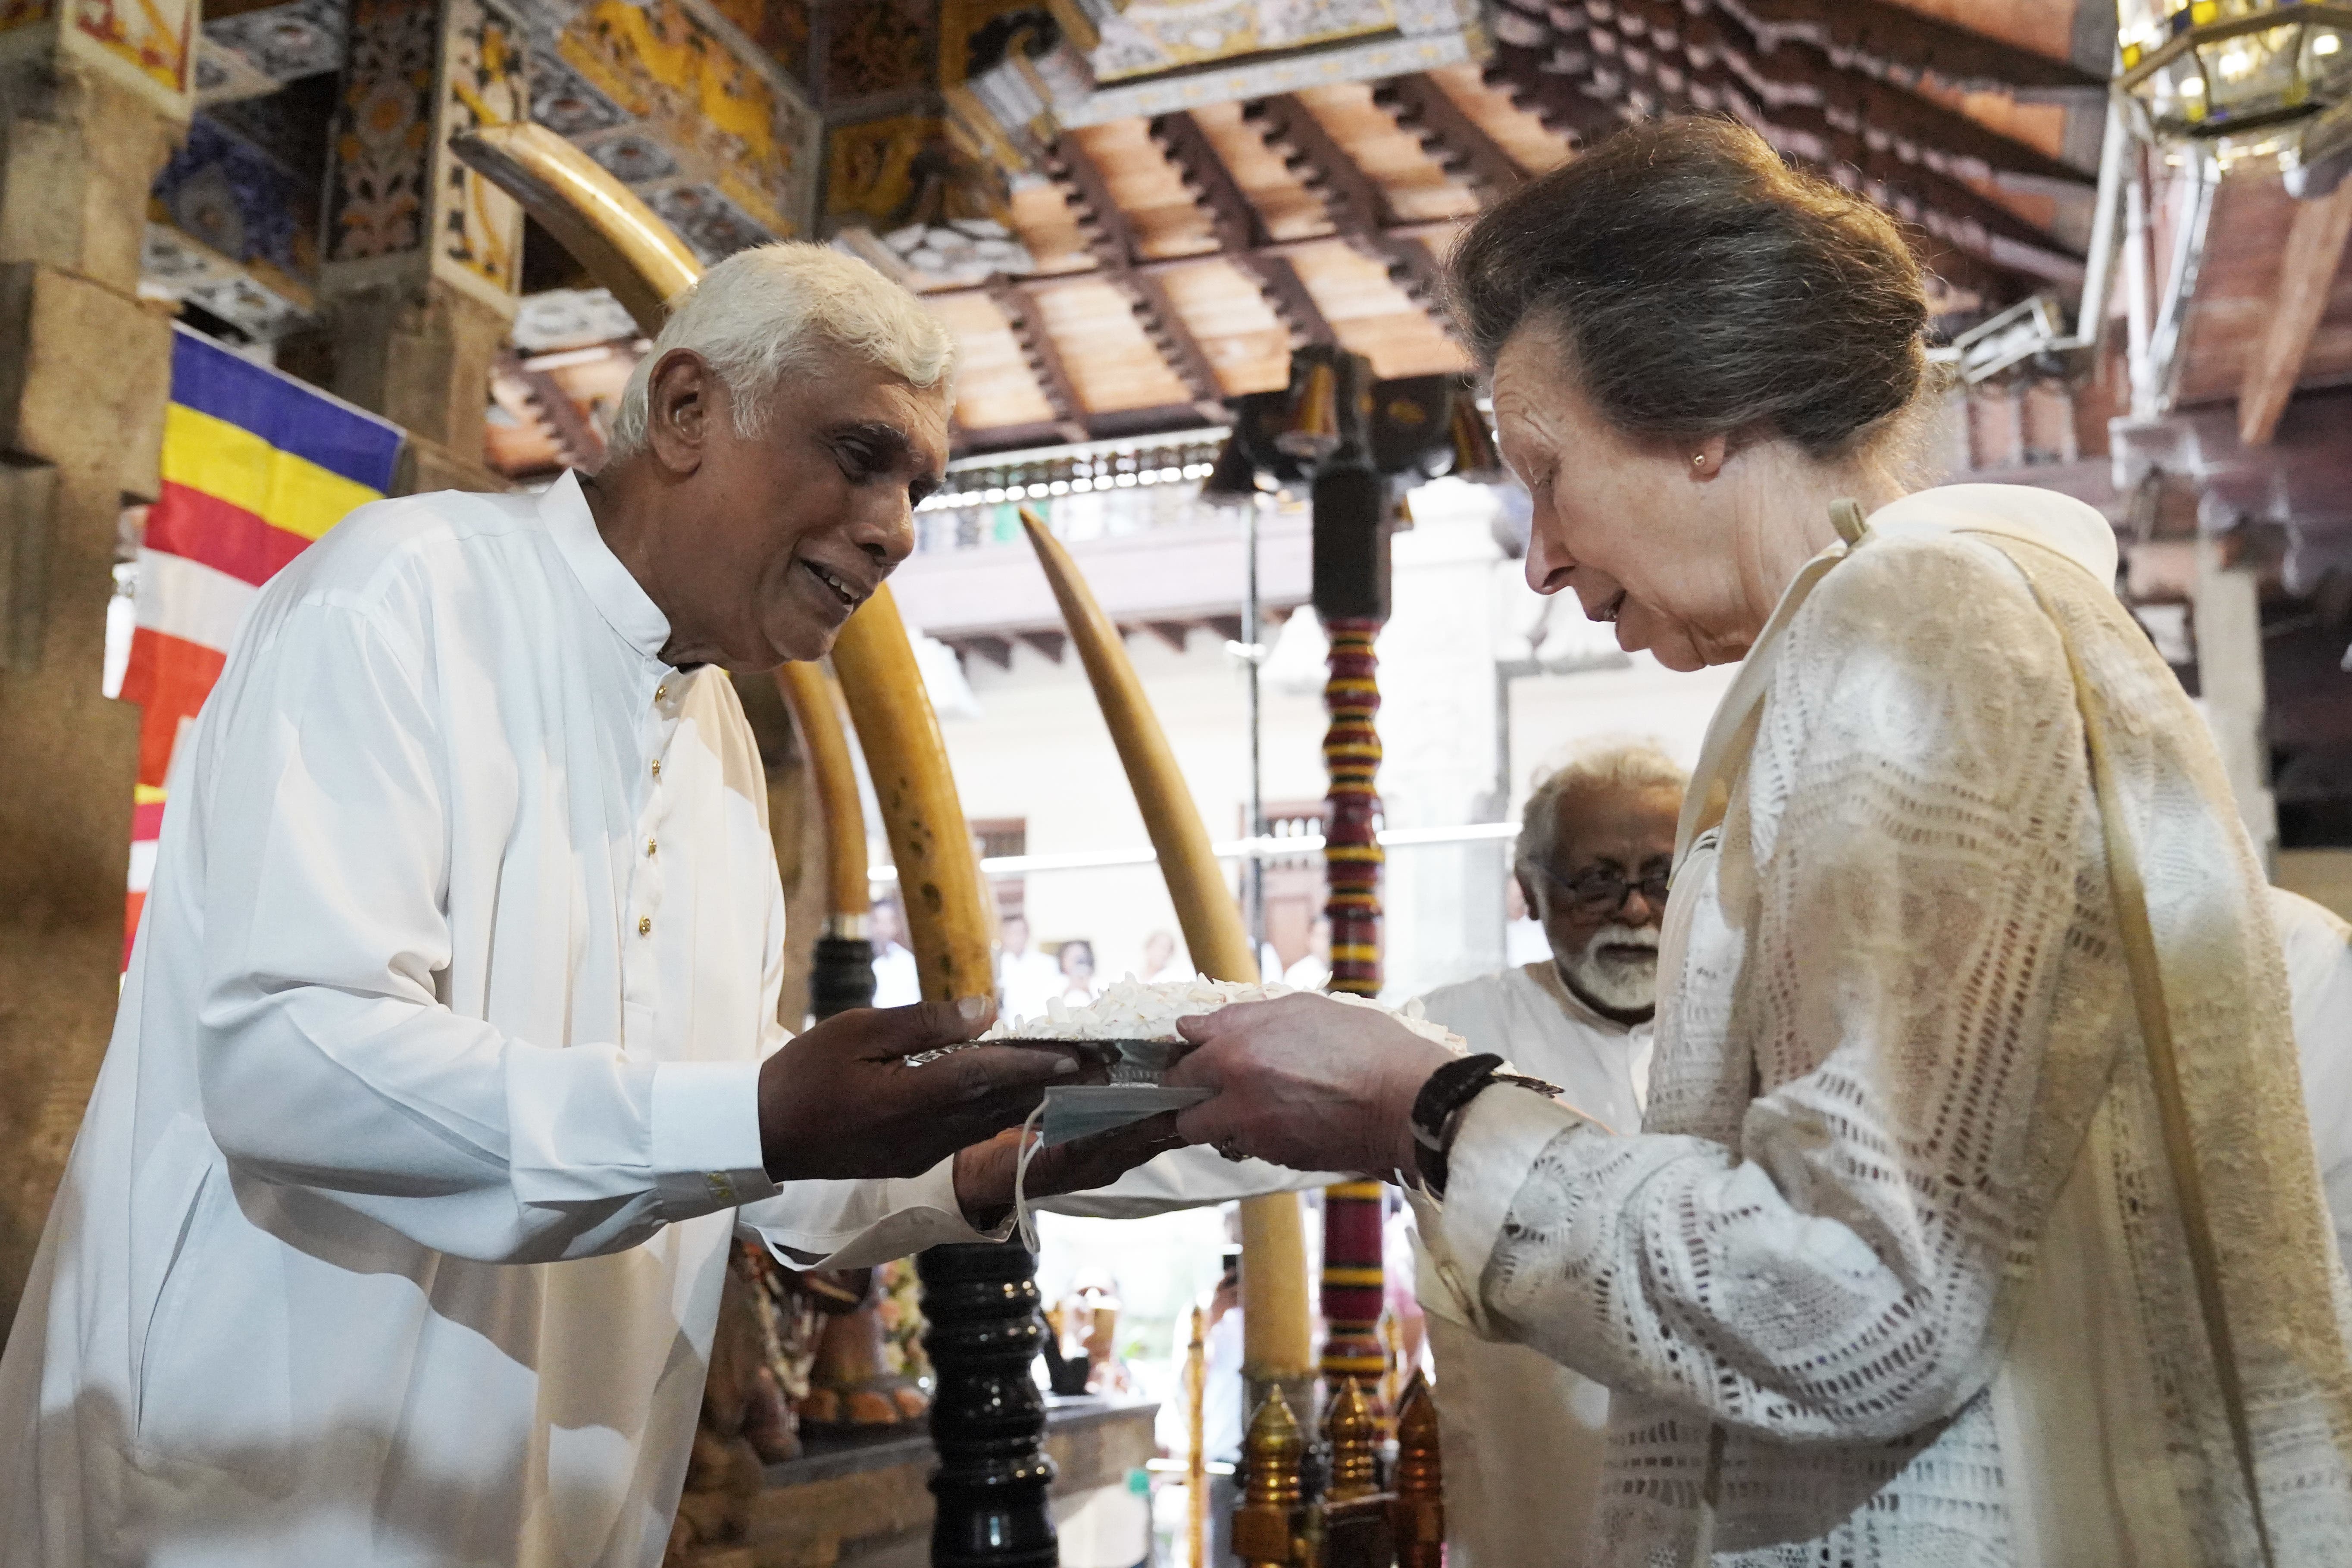 The Princess Royal prepares to offer jasmine flowers during a visit the Temple of the Sacred Tooth Relic in Kandy (Jonathan Brady/PA)